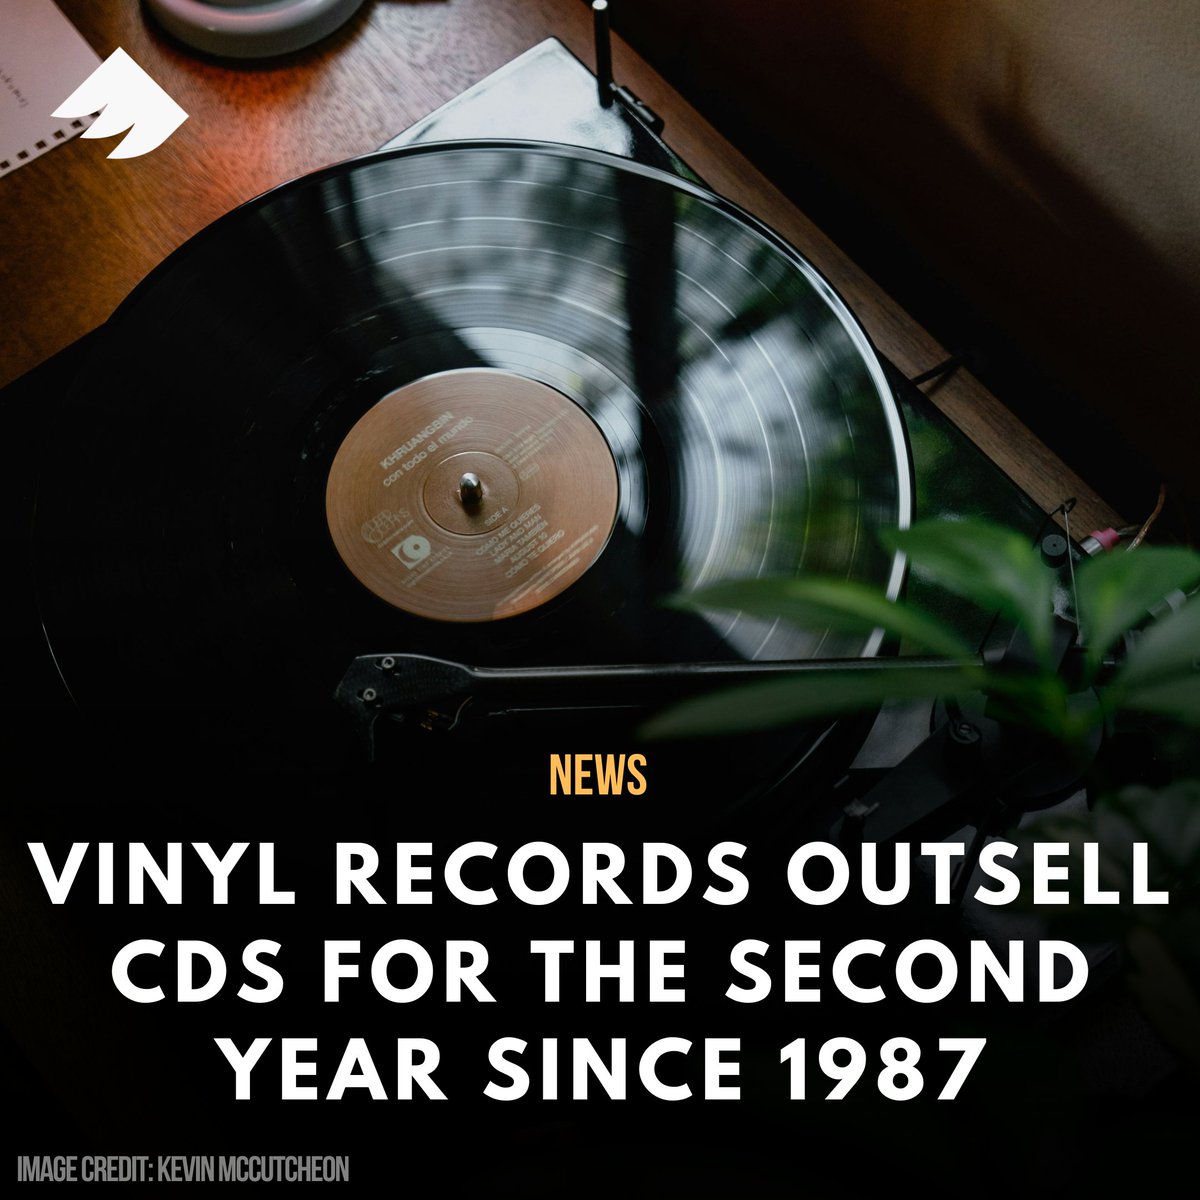 Via The Verge, the RIAA revealed that people bought 43 million vinyl records last year, 6 million more than the number of CDs sold. This is the second time this has happened since 1987. It also outsold it in terms of actual money made by double the amount.